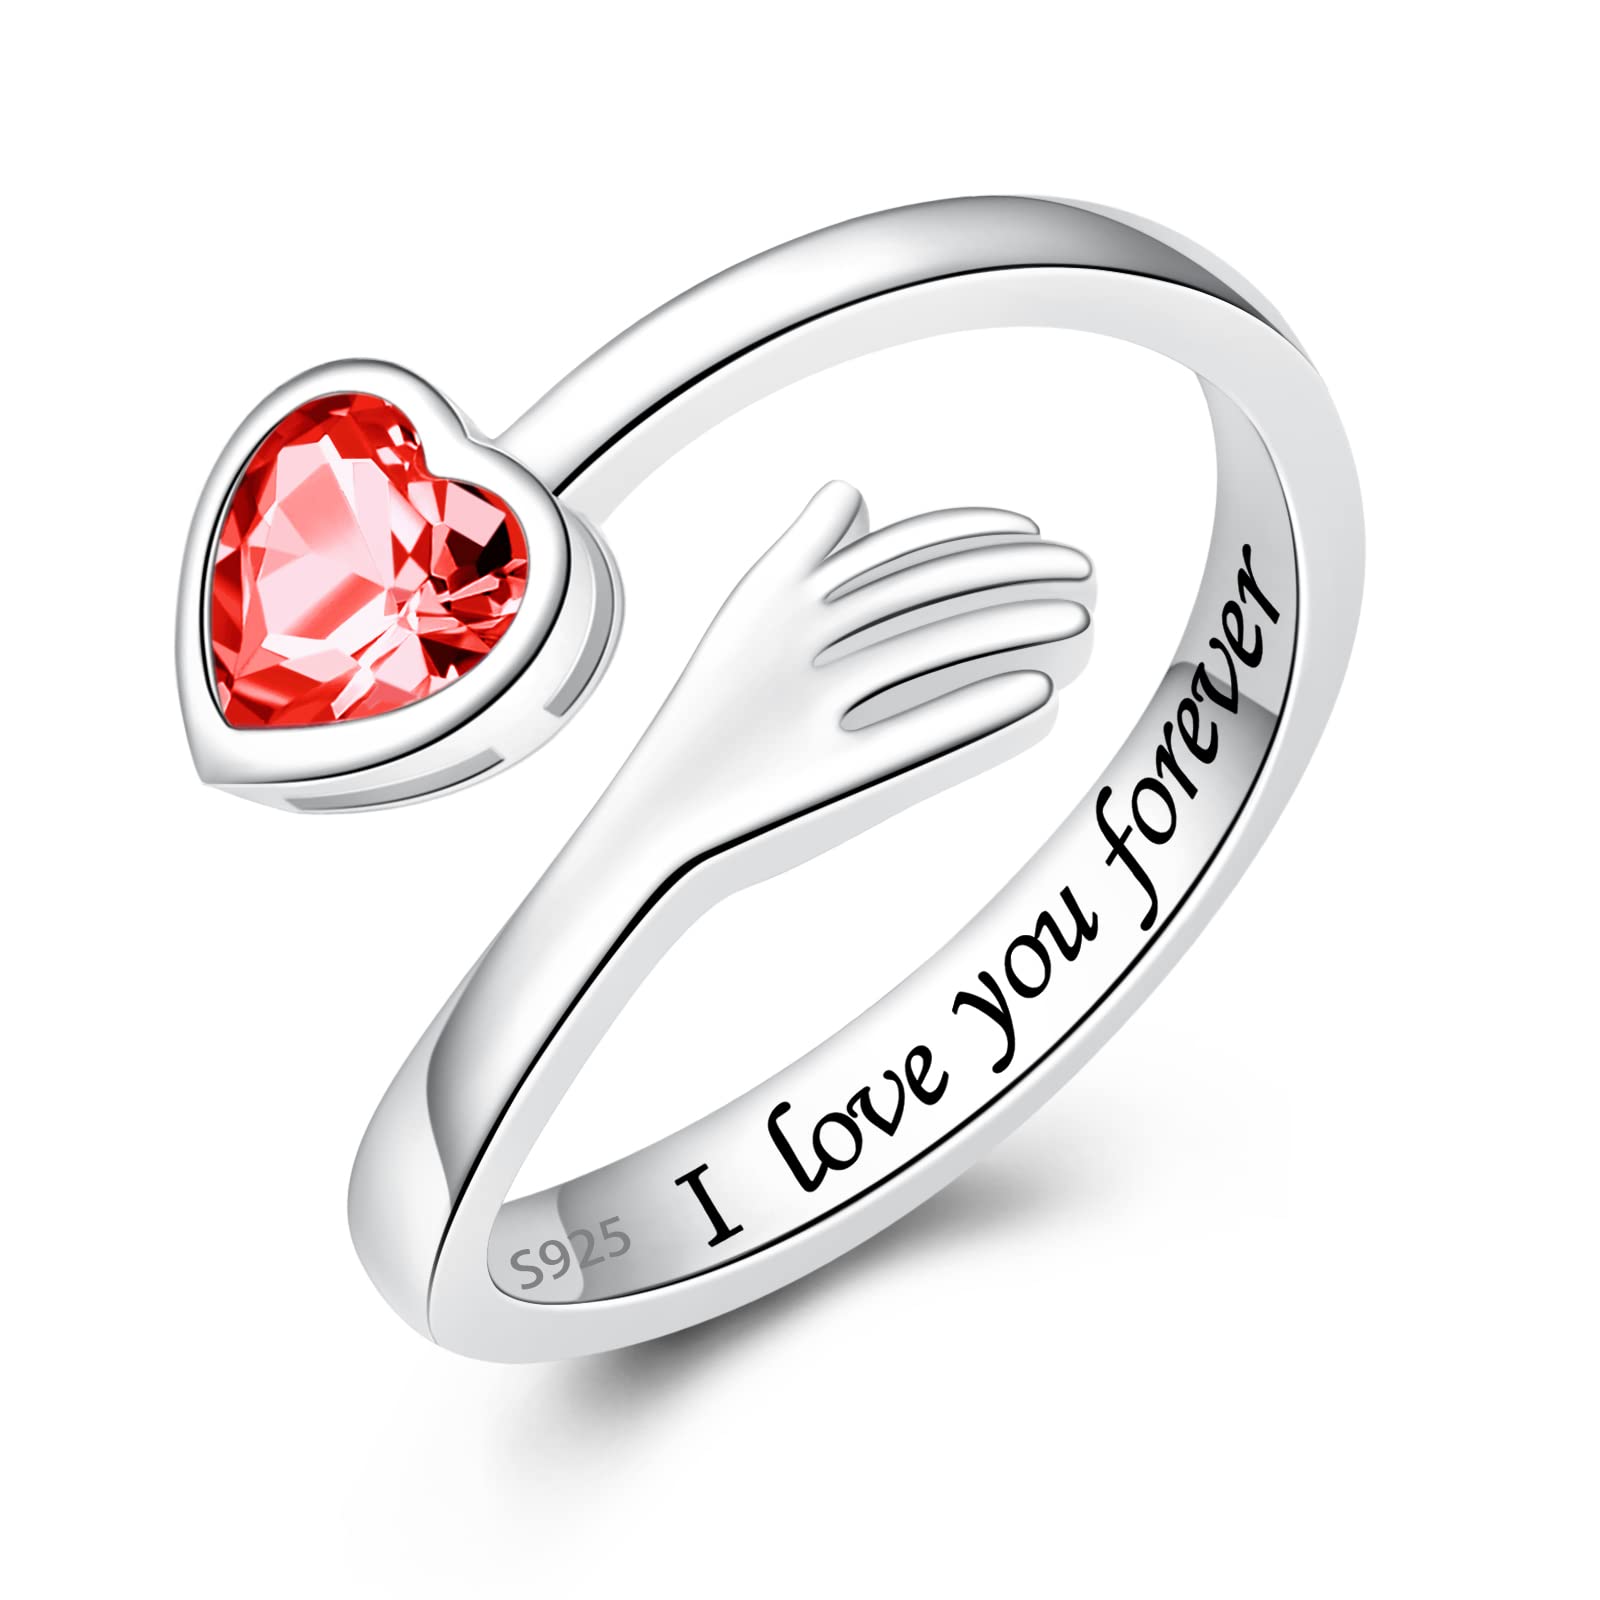 Adjustable Hug Ring Personalized Birthstone Open Ring Gift for Her-YITUB